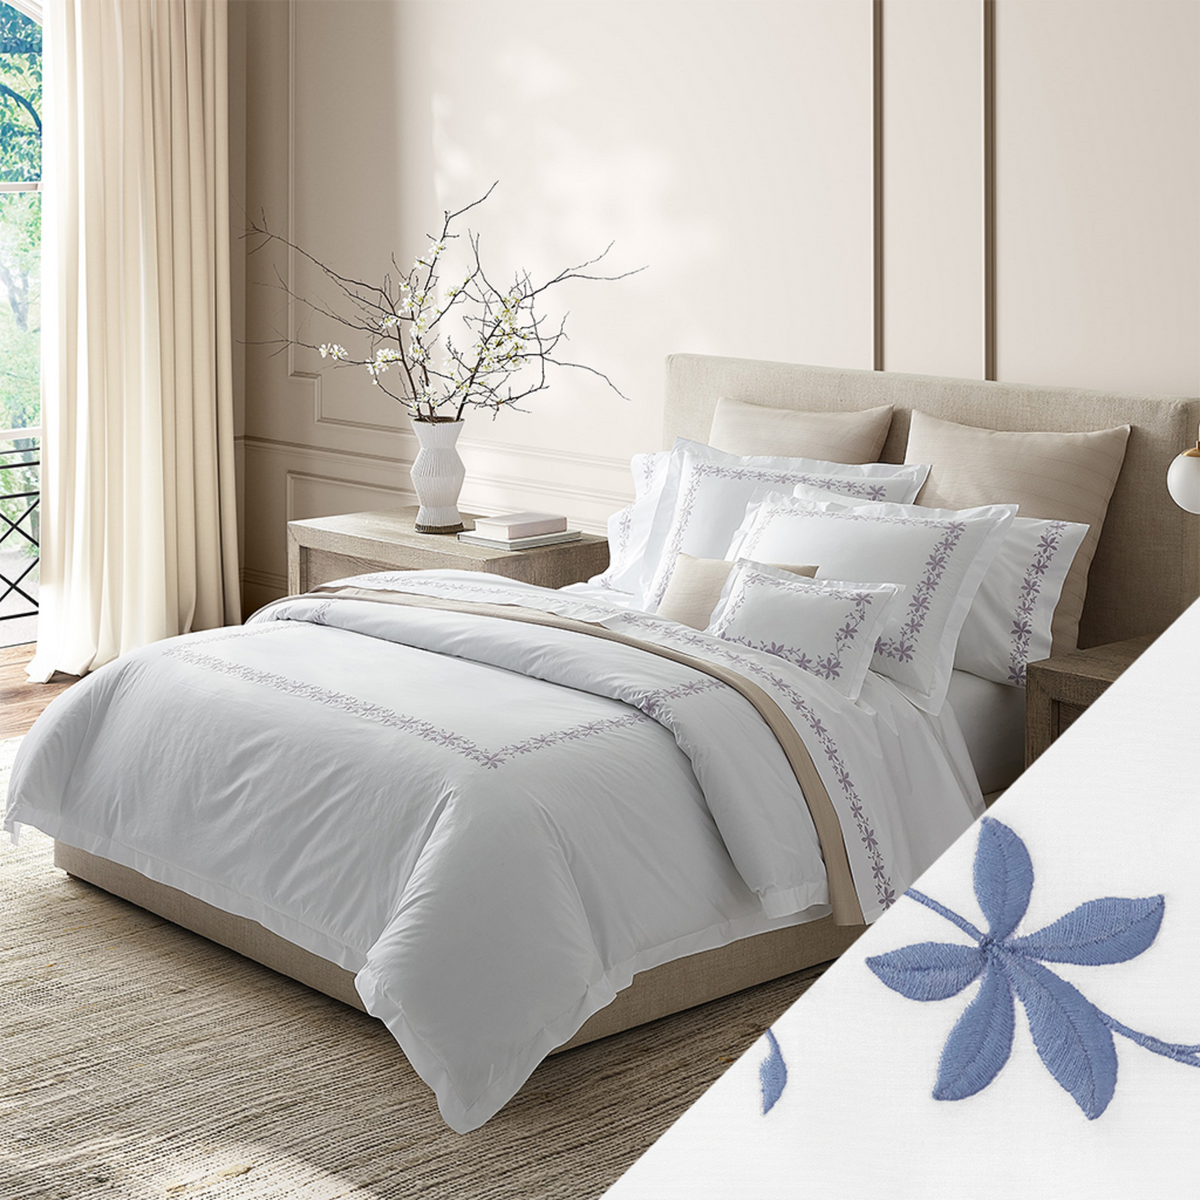 Horizontal View of Matouk Callista Bedding Collection with Swatch in Bluebell Color